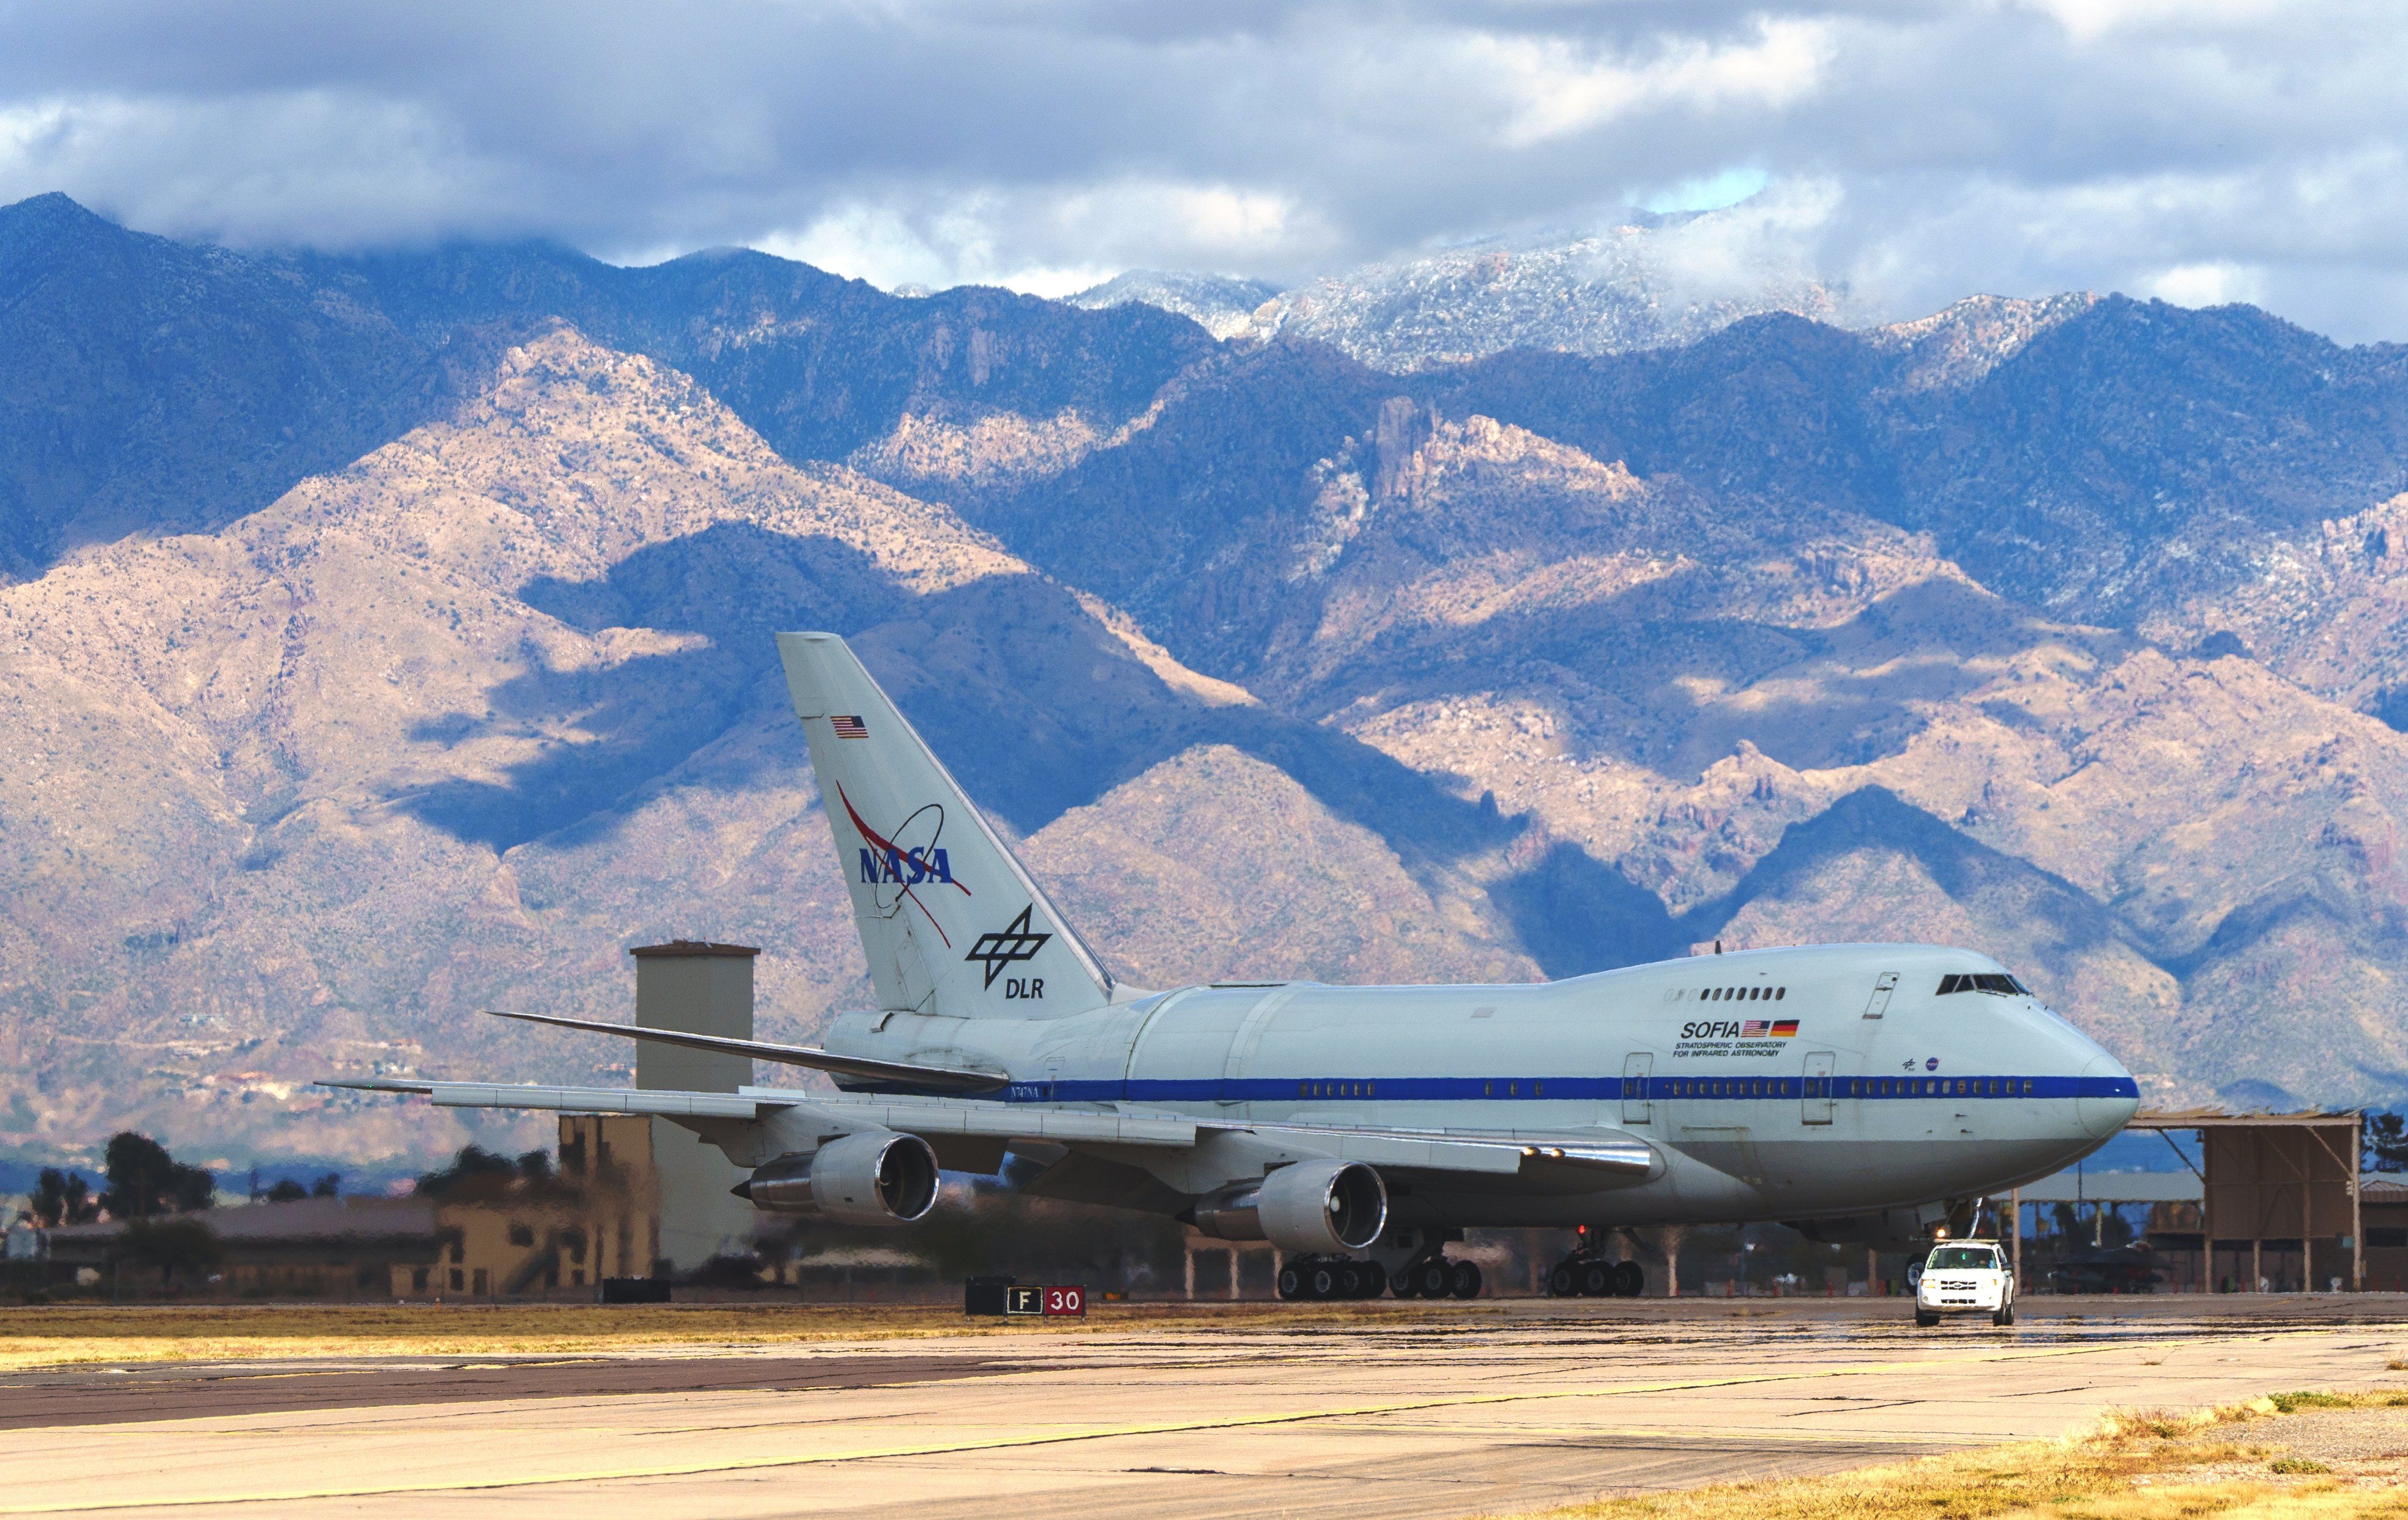 NASA's Boeing 747 SOFIA aircraft on the ground at Tucson’s Davis-Monthan Air Force Base.